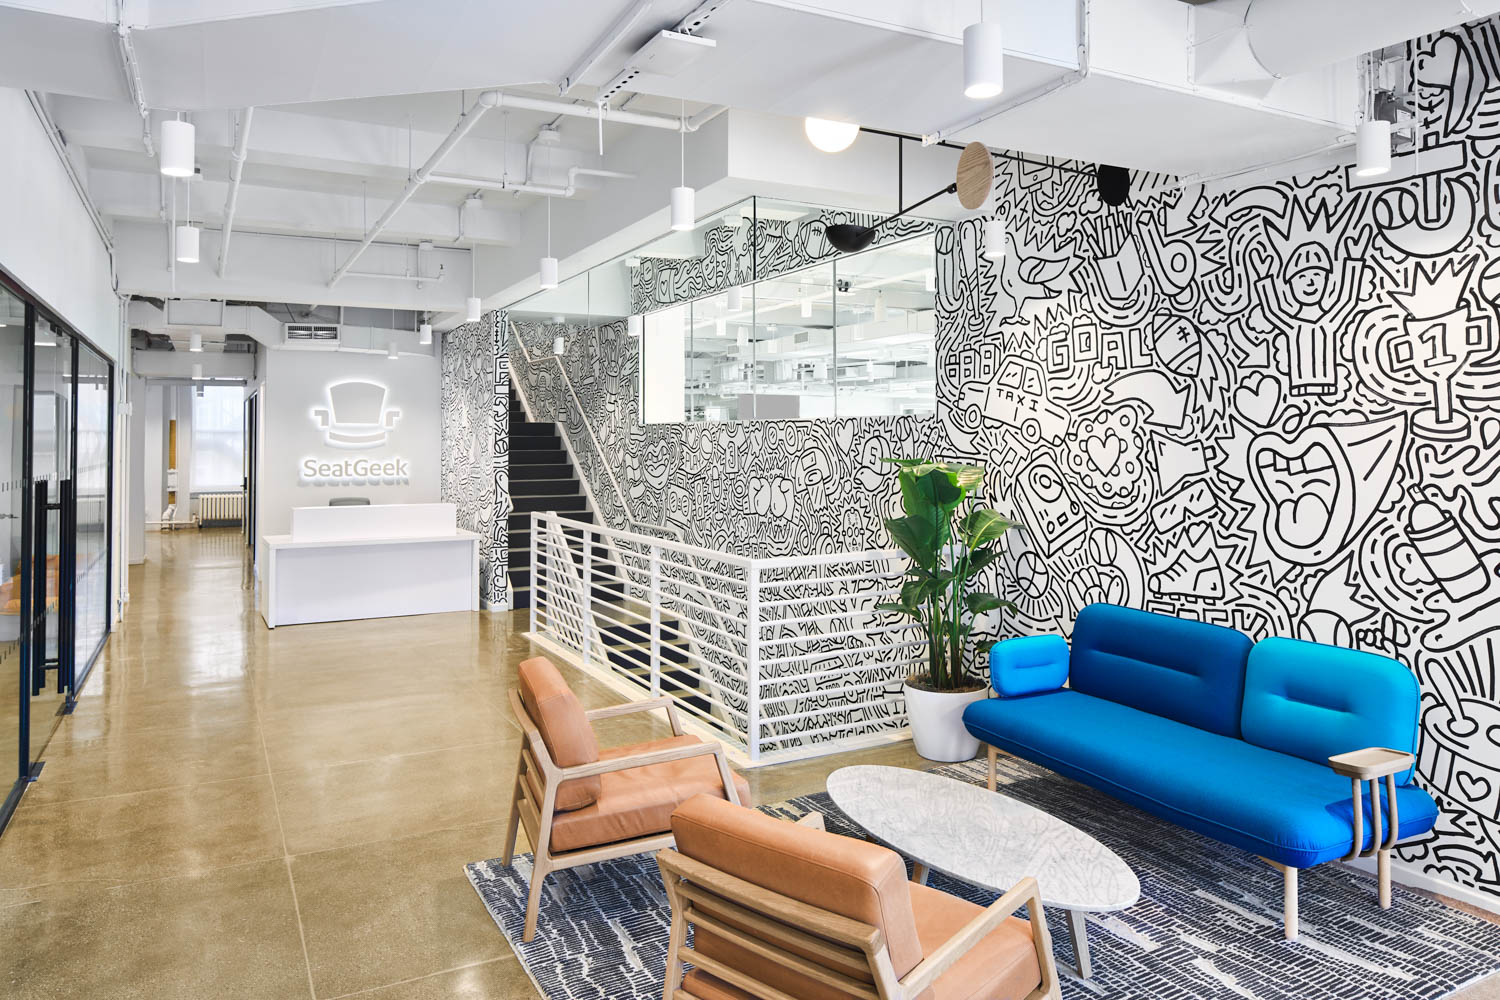 A lounge area with a punchy blue sofa in the office of SeatGeek